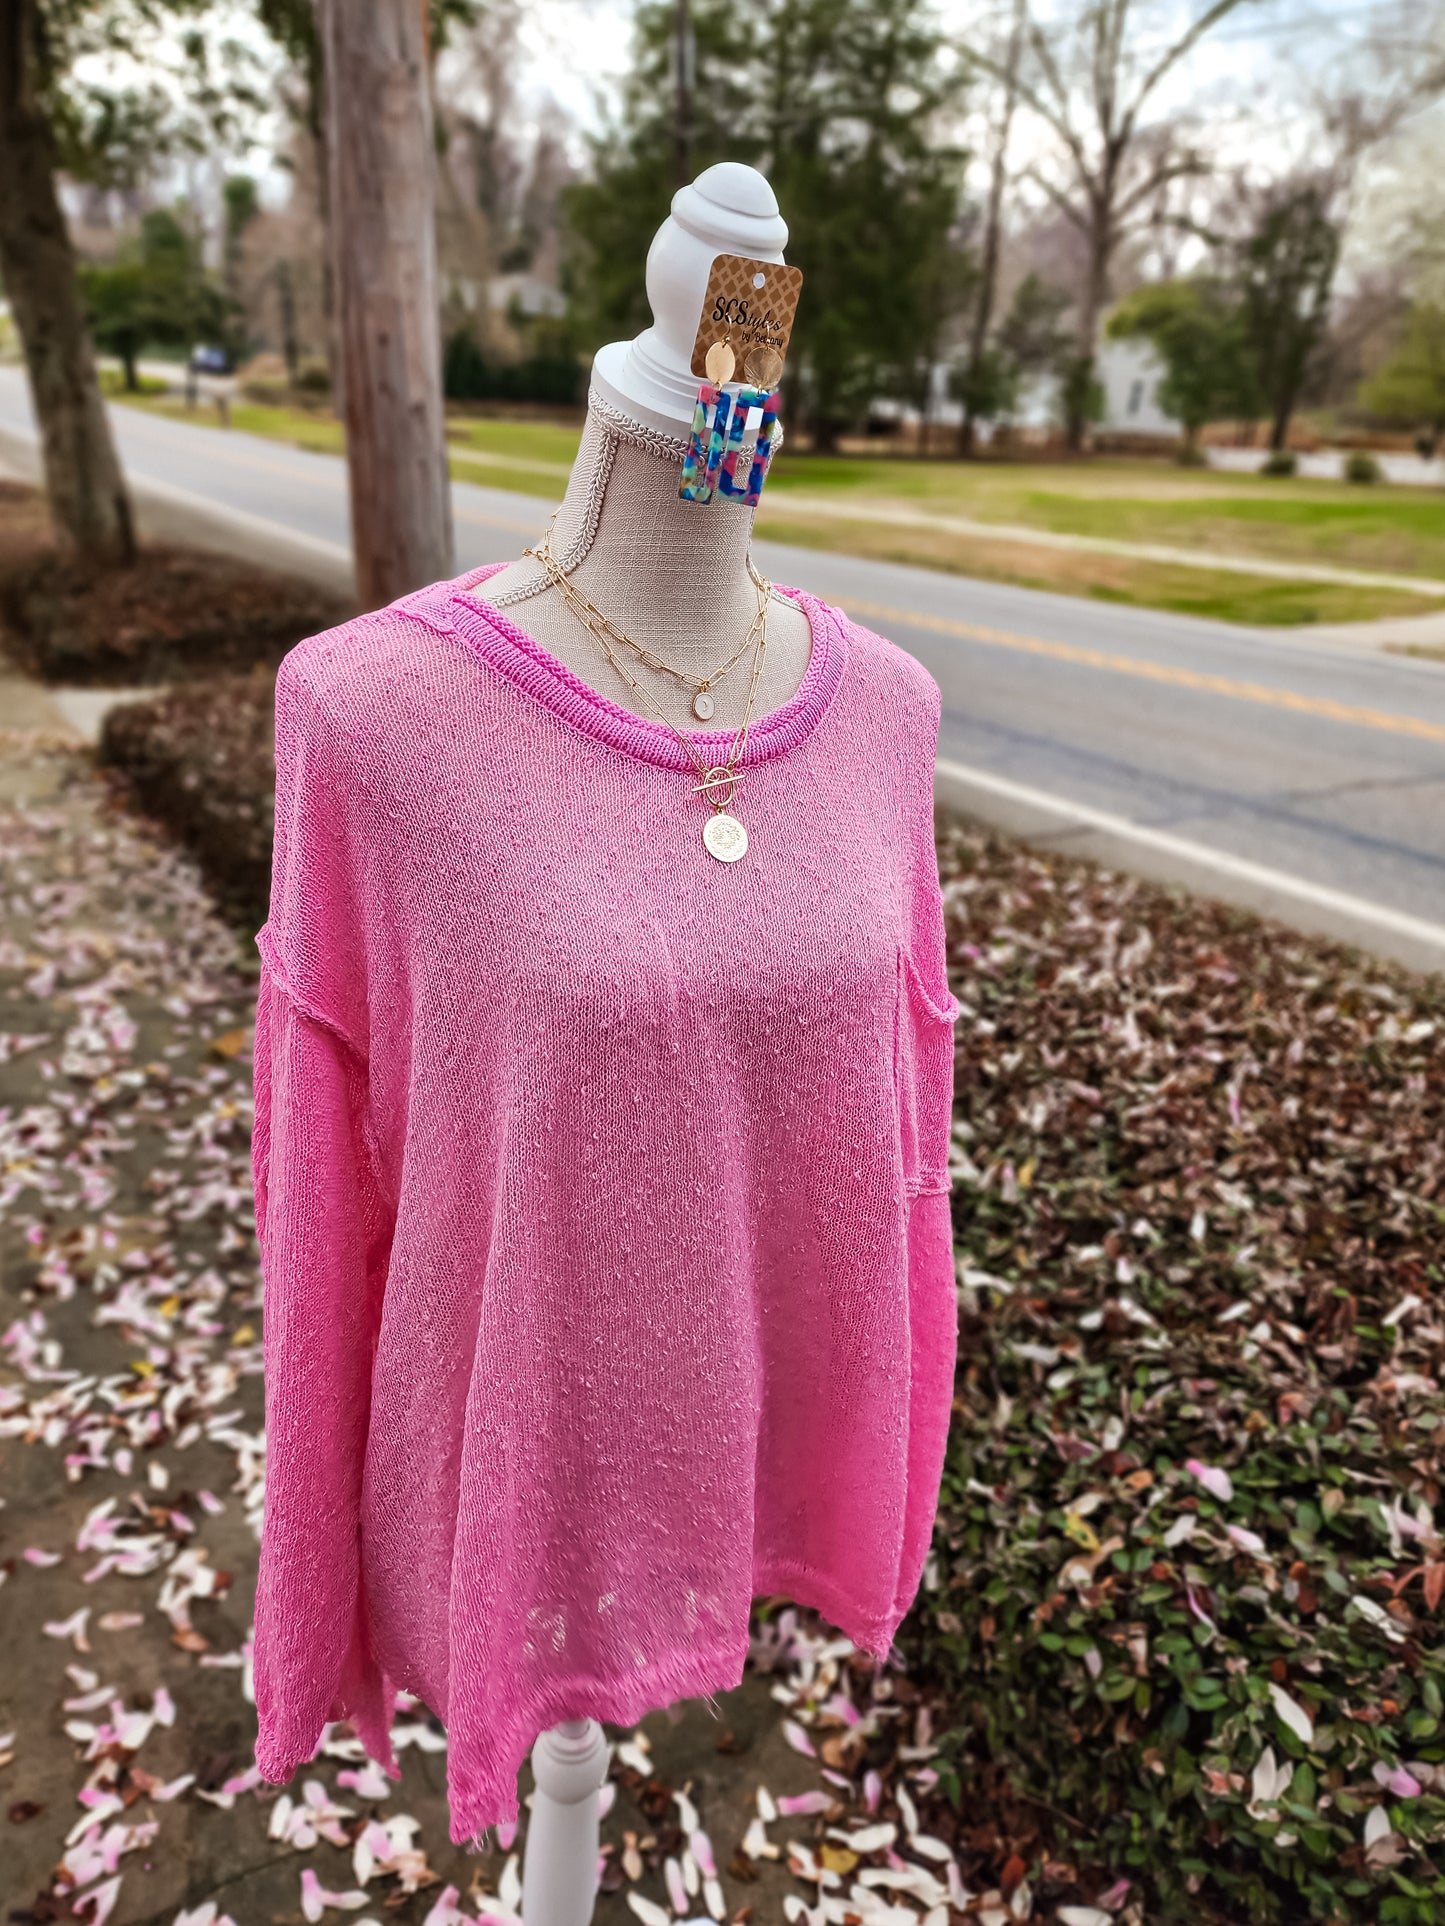 Chessley Light Weight Knit Sweater (Barbie Pink)